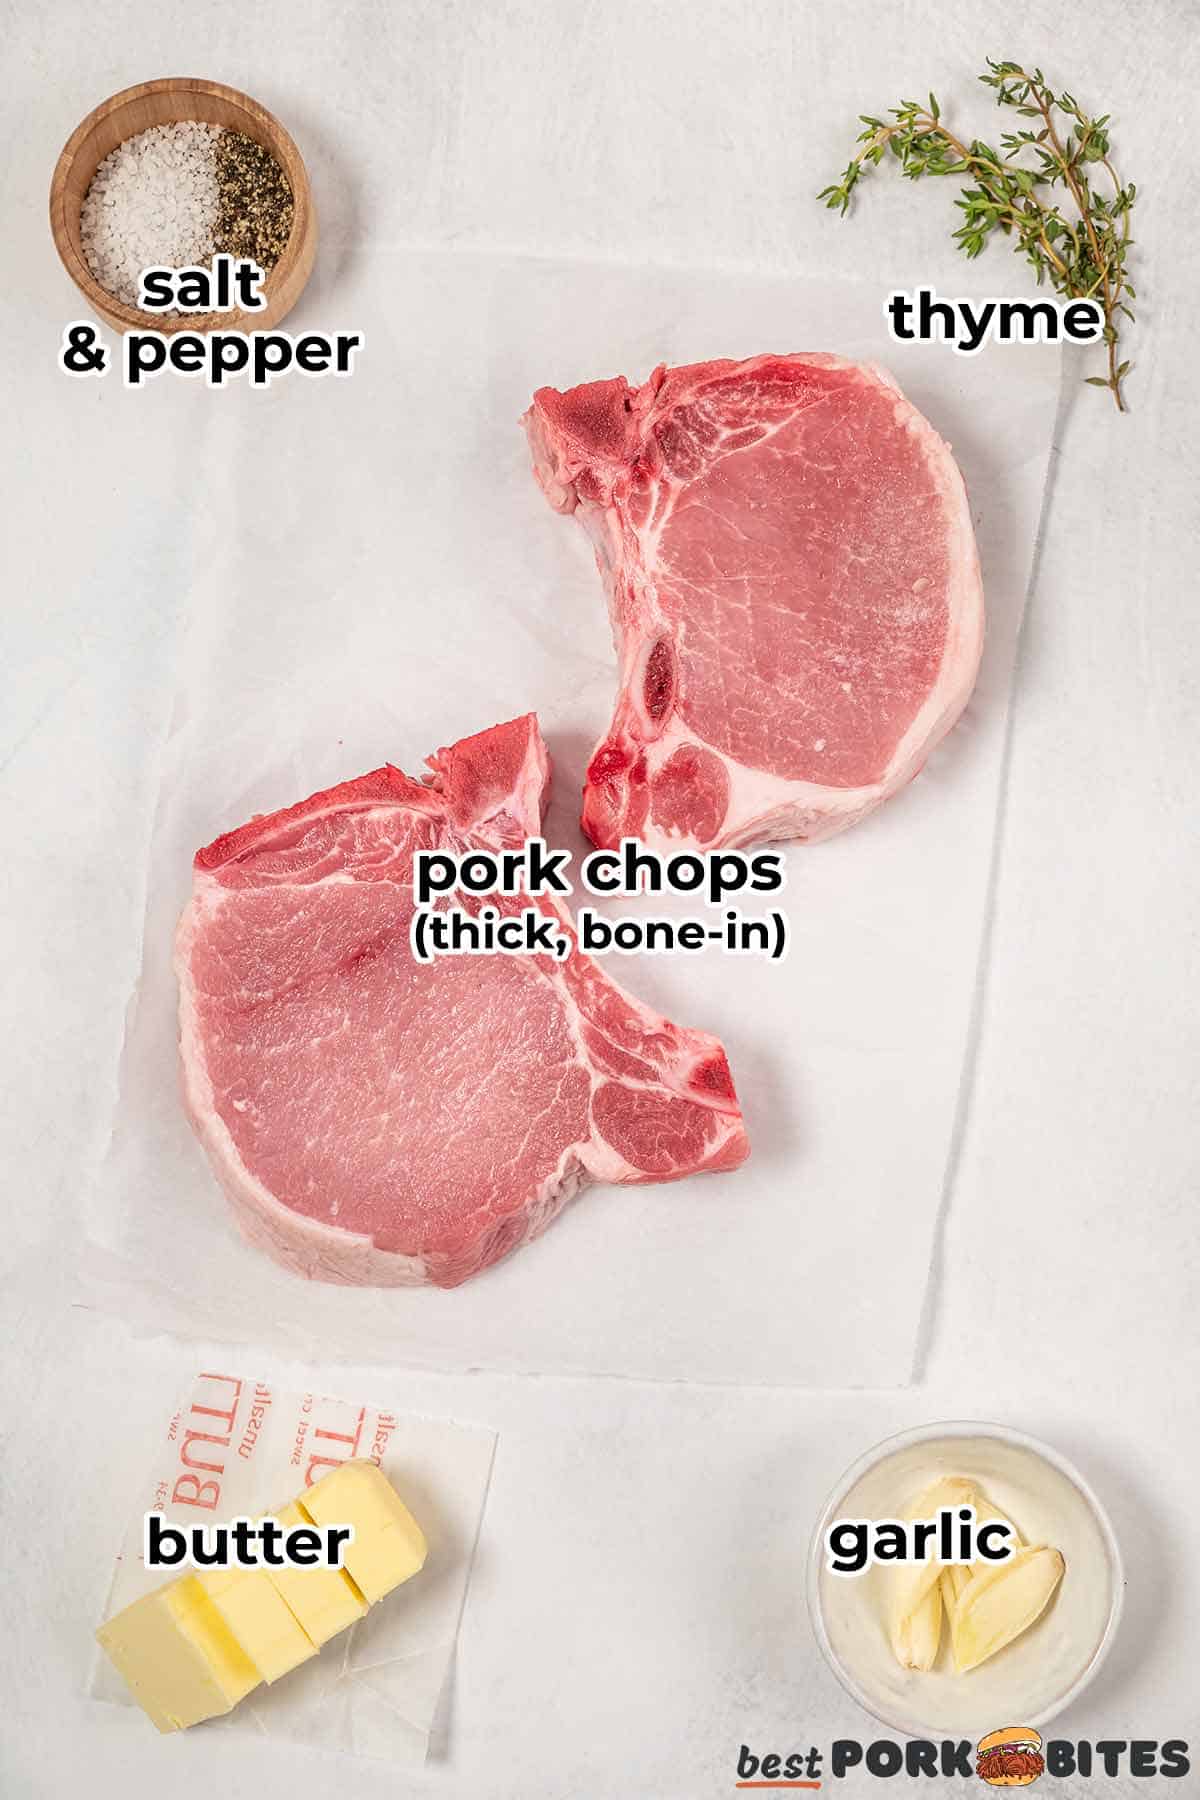 ingredients to pan fry pork chops: pork chops, salt and pepper, thyme, butter, and garlic, on a white surface